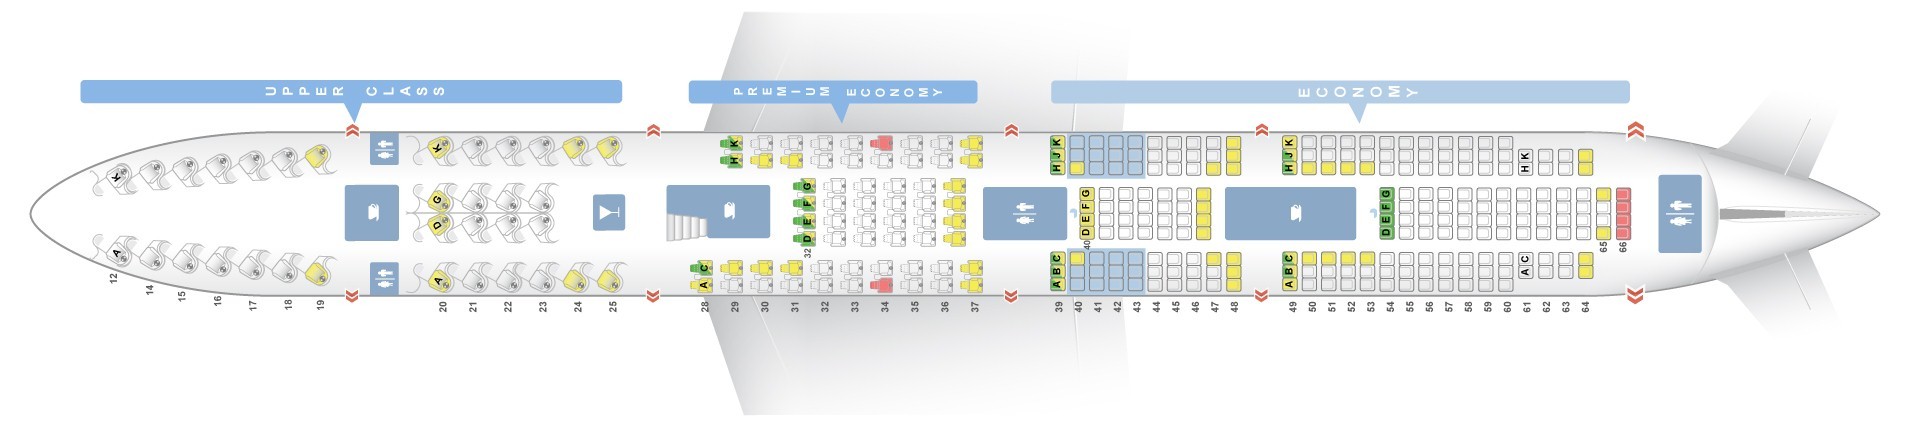 Boeing 747 Seating Chart